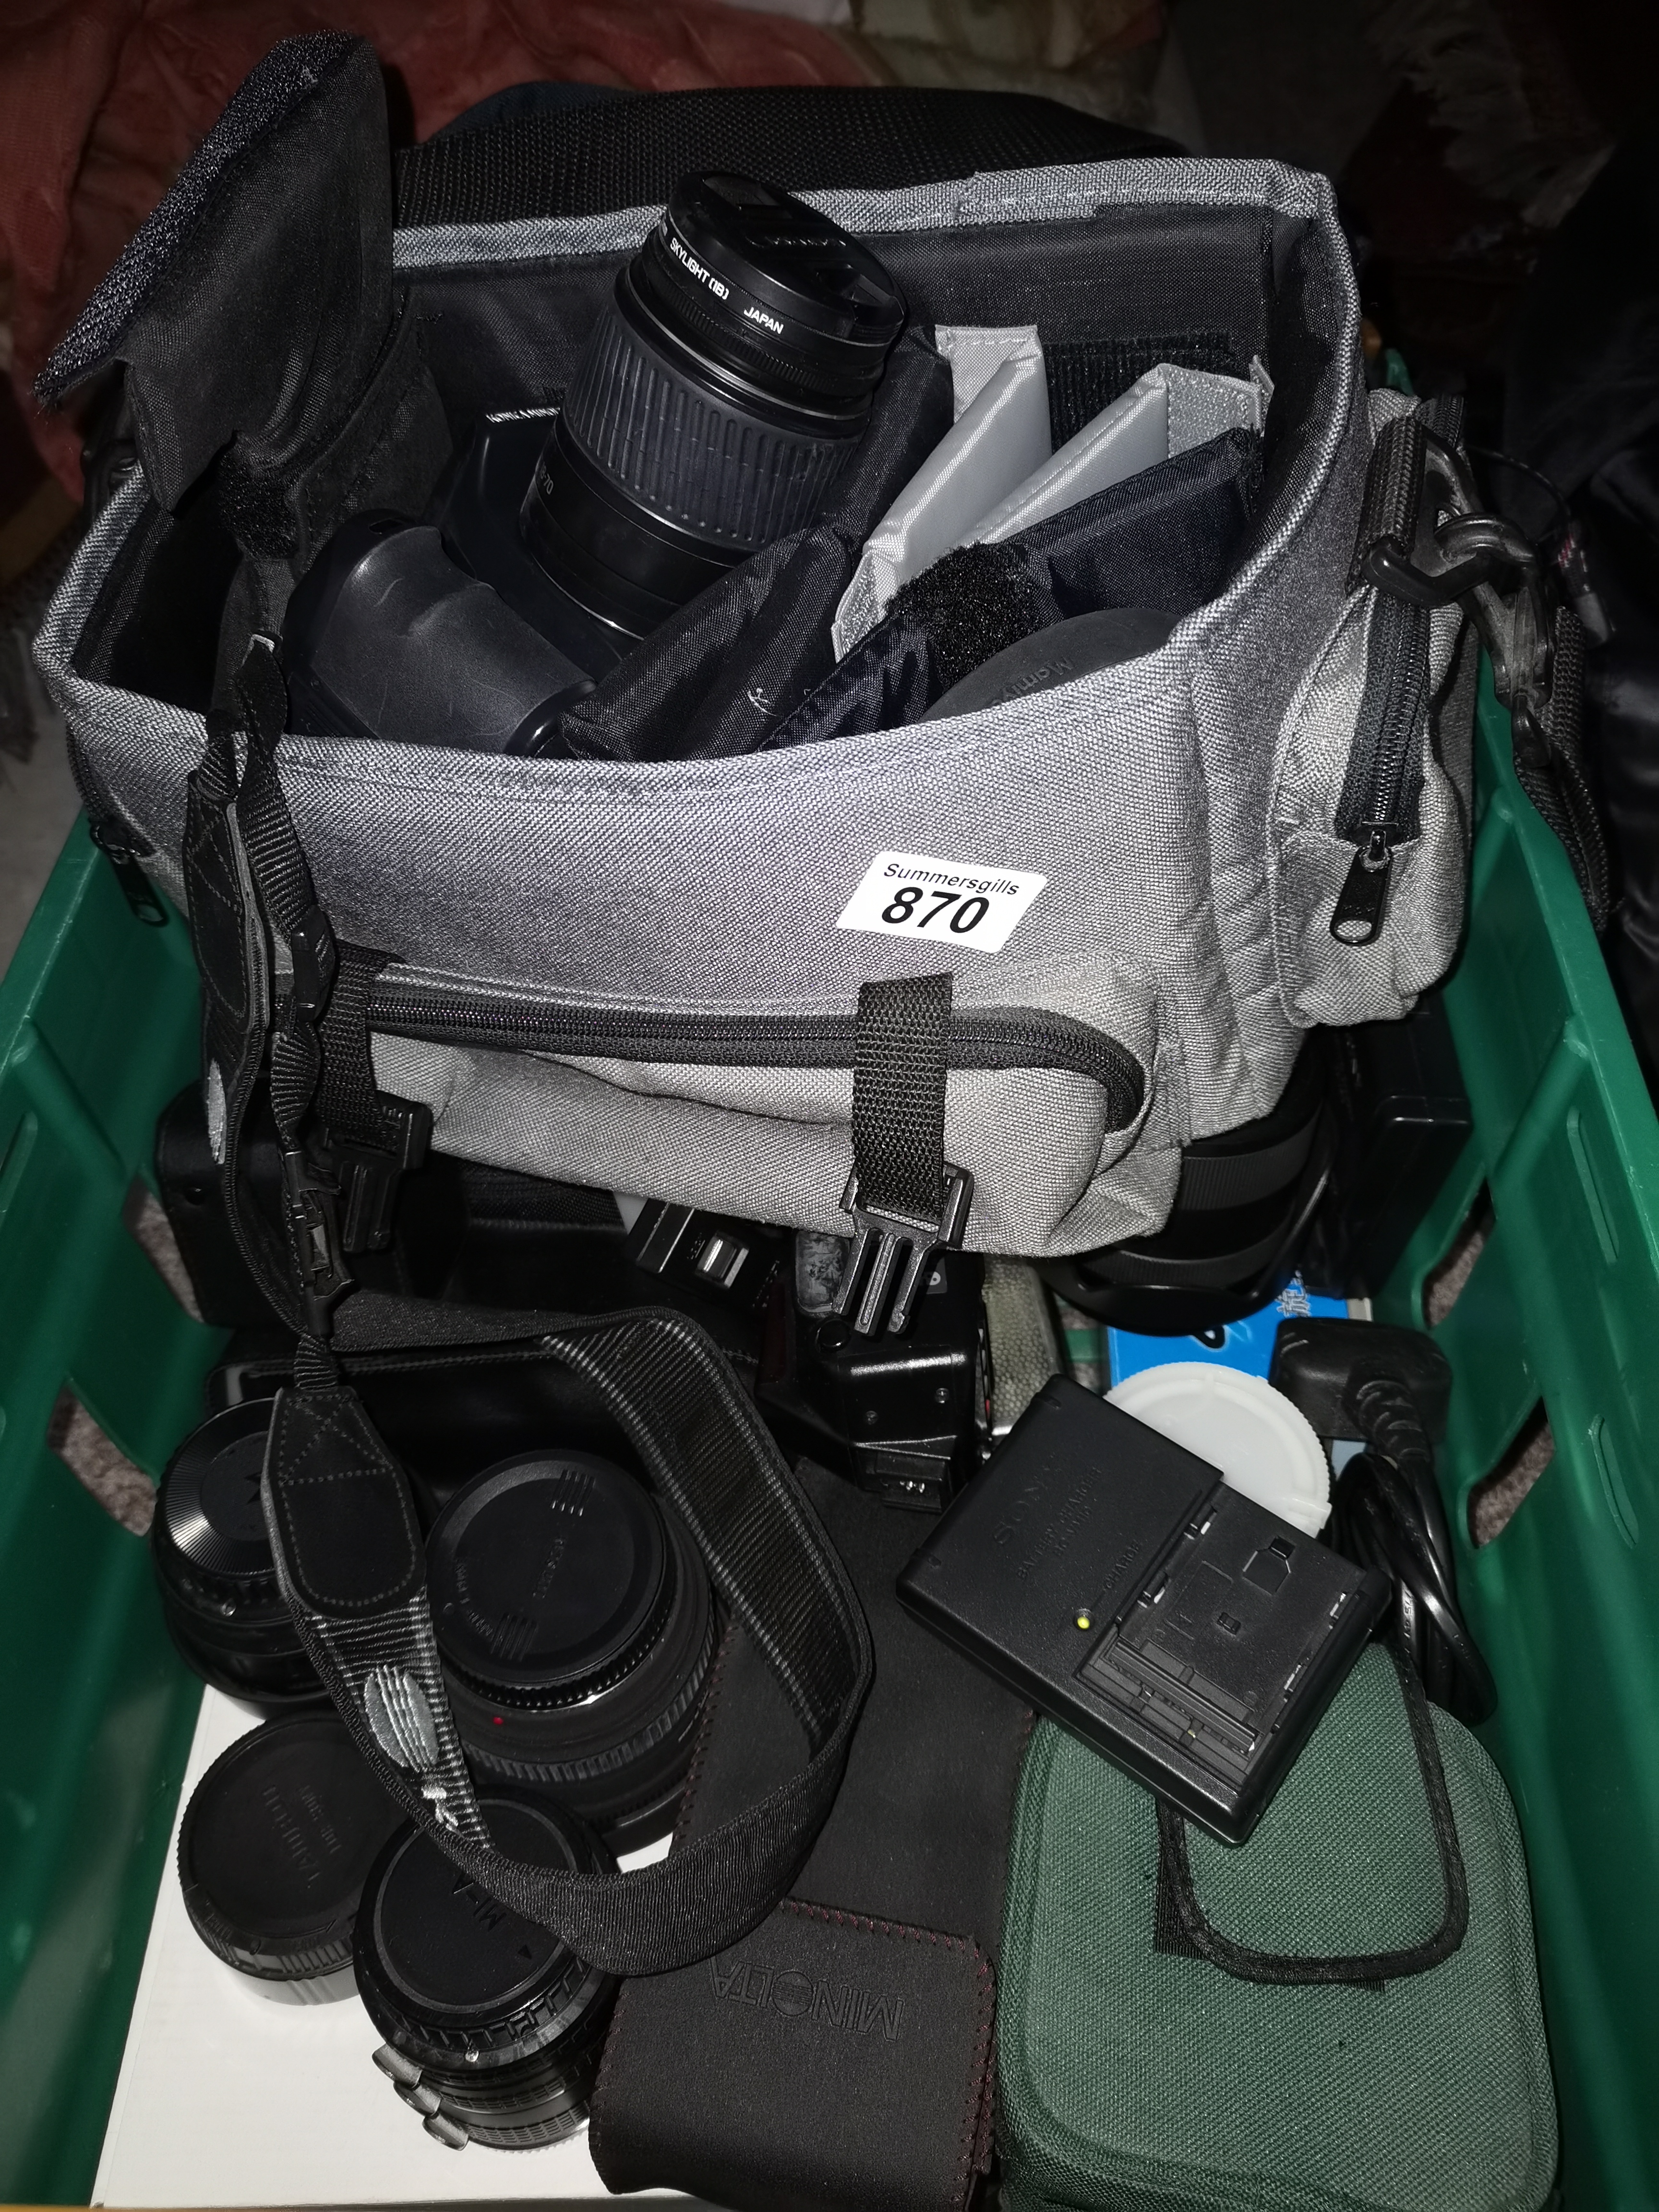 A Very Large Collection Of Photographic Equipment Including Tripods Bags Cameras and Numerous Lenses